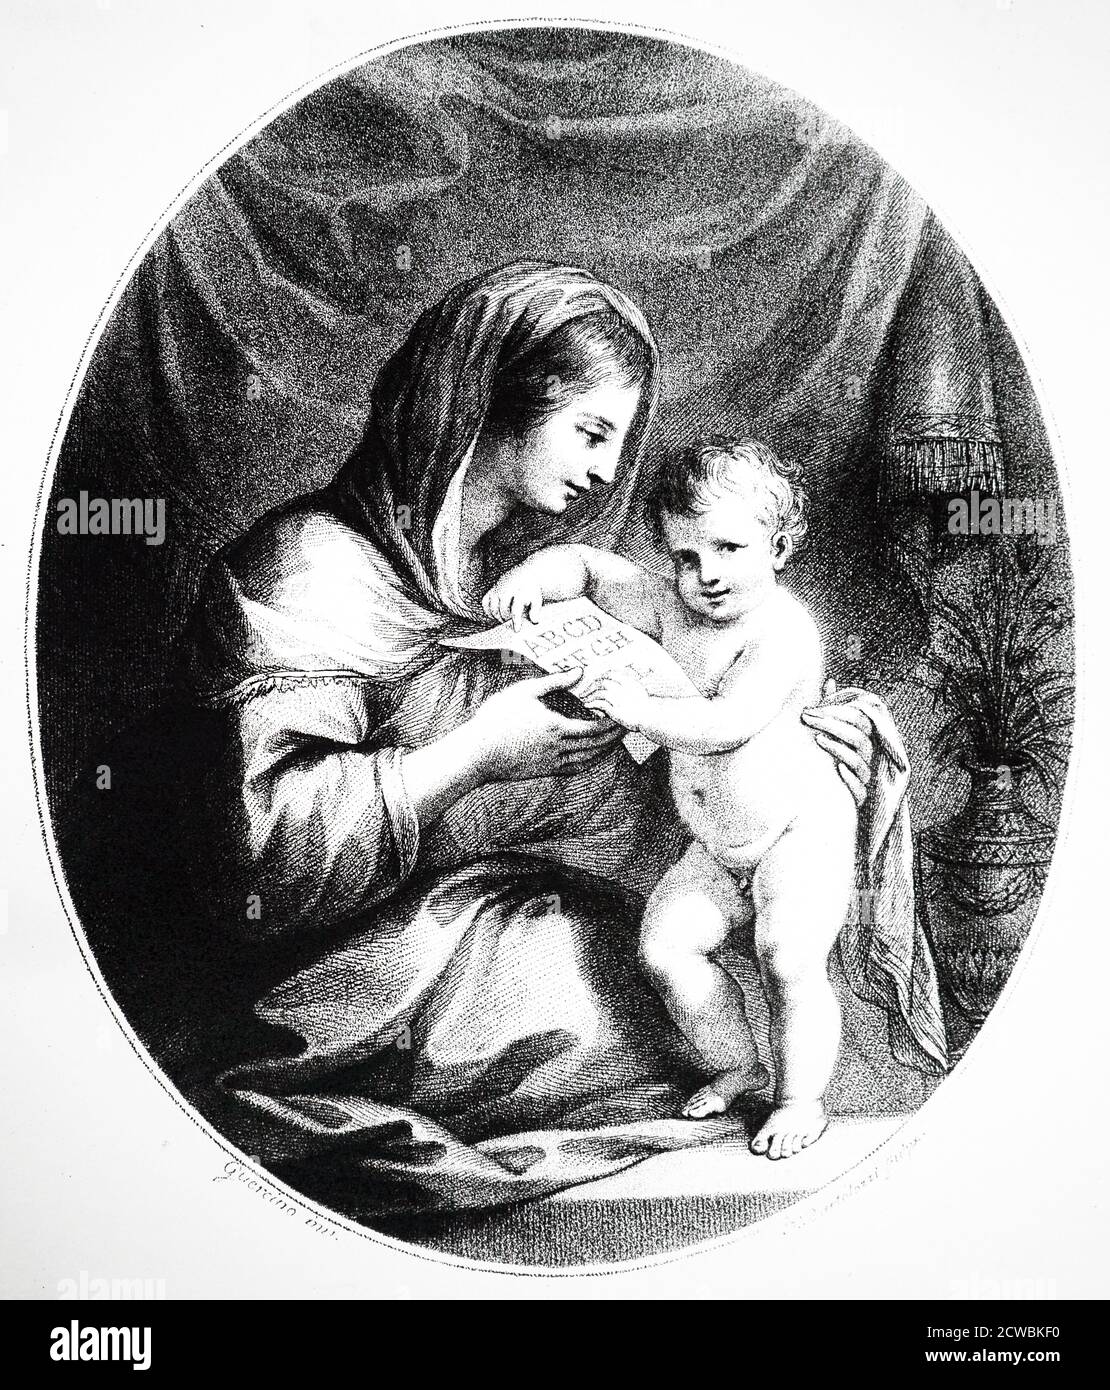 Engraving depicting a mother teaching her child to read. Engraving after work by Francesco Bartolozzi. Stock Photo